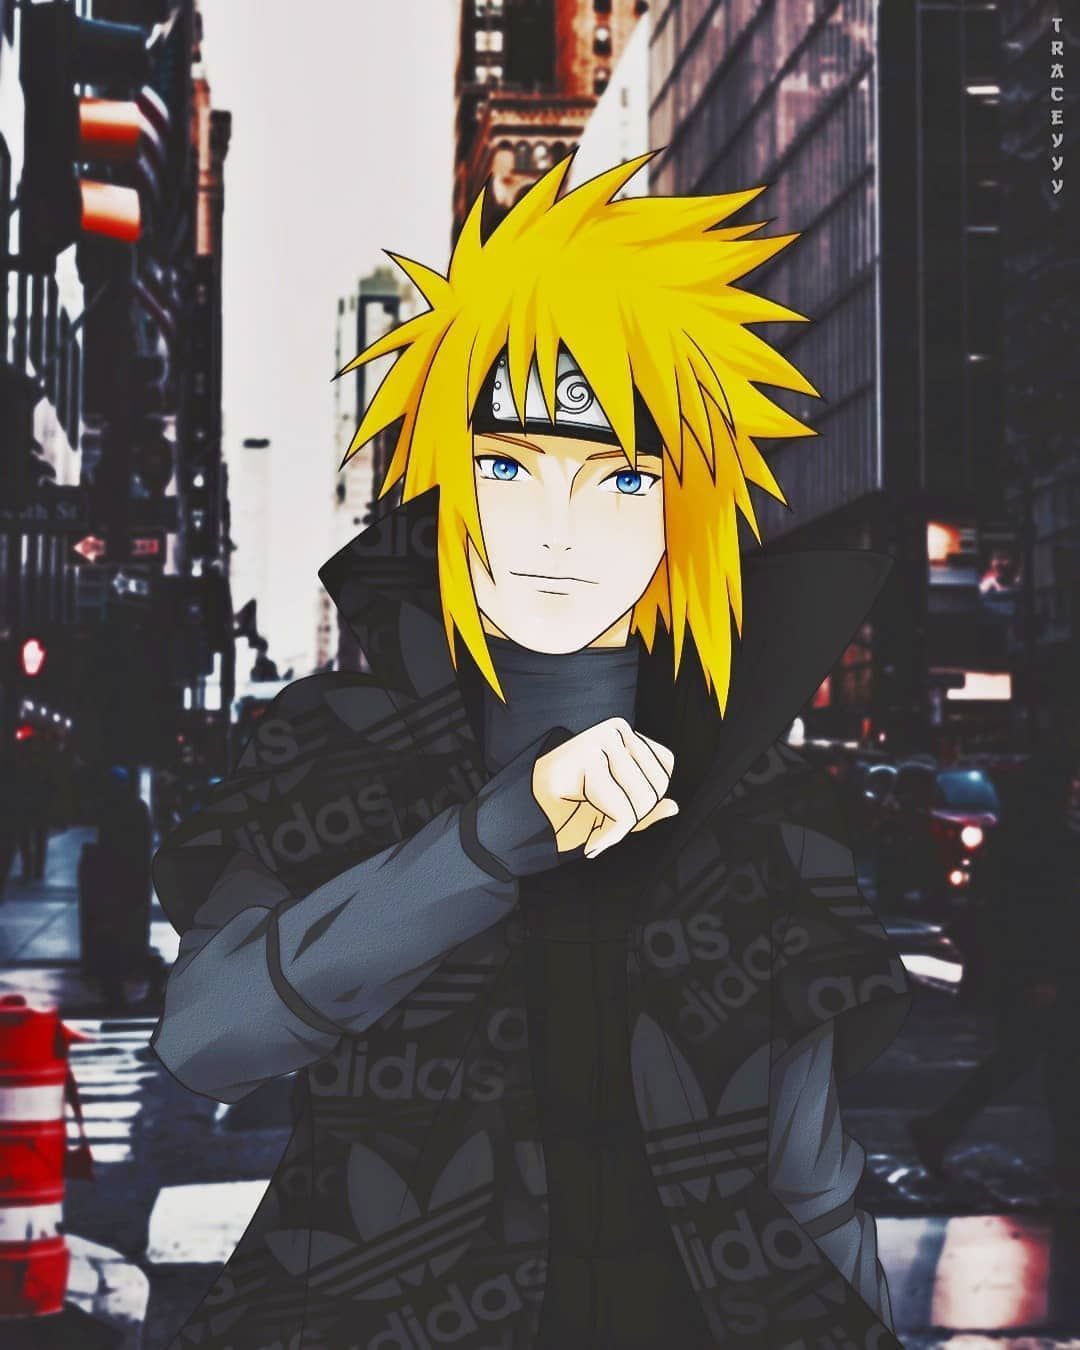 naruto aesthetic pictures wallpapers wallpaper cave on naruto aesthetic pictures wallpapers